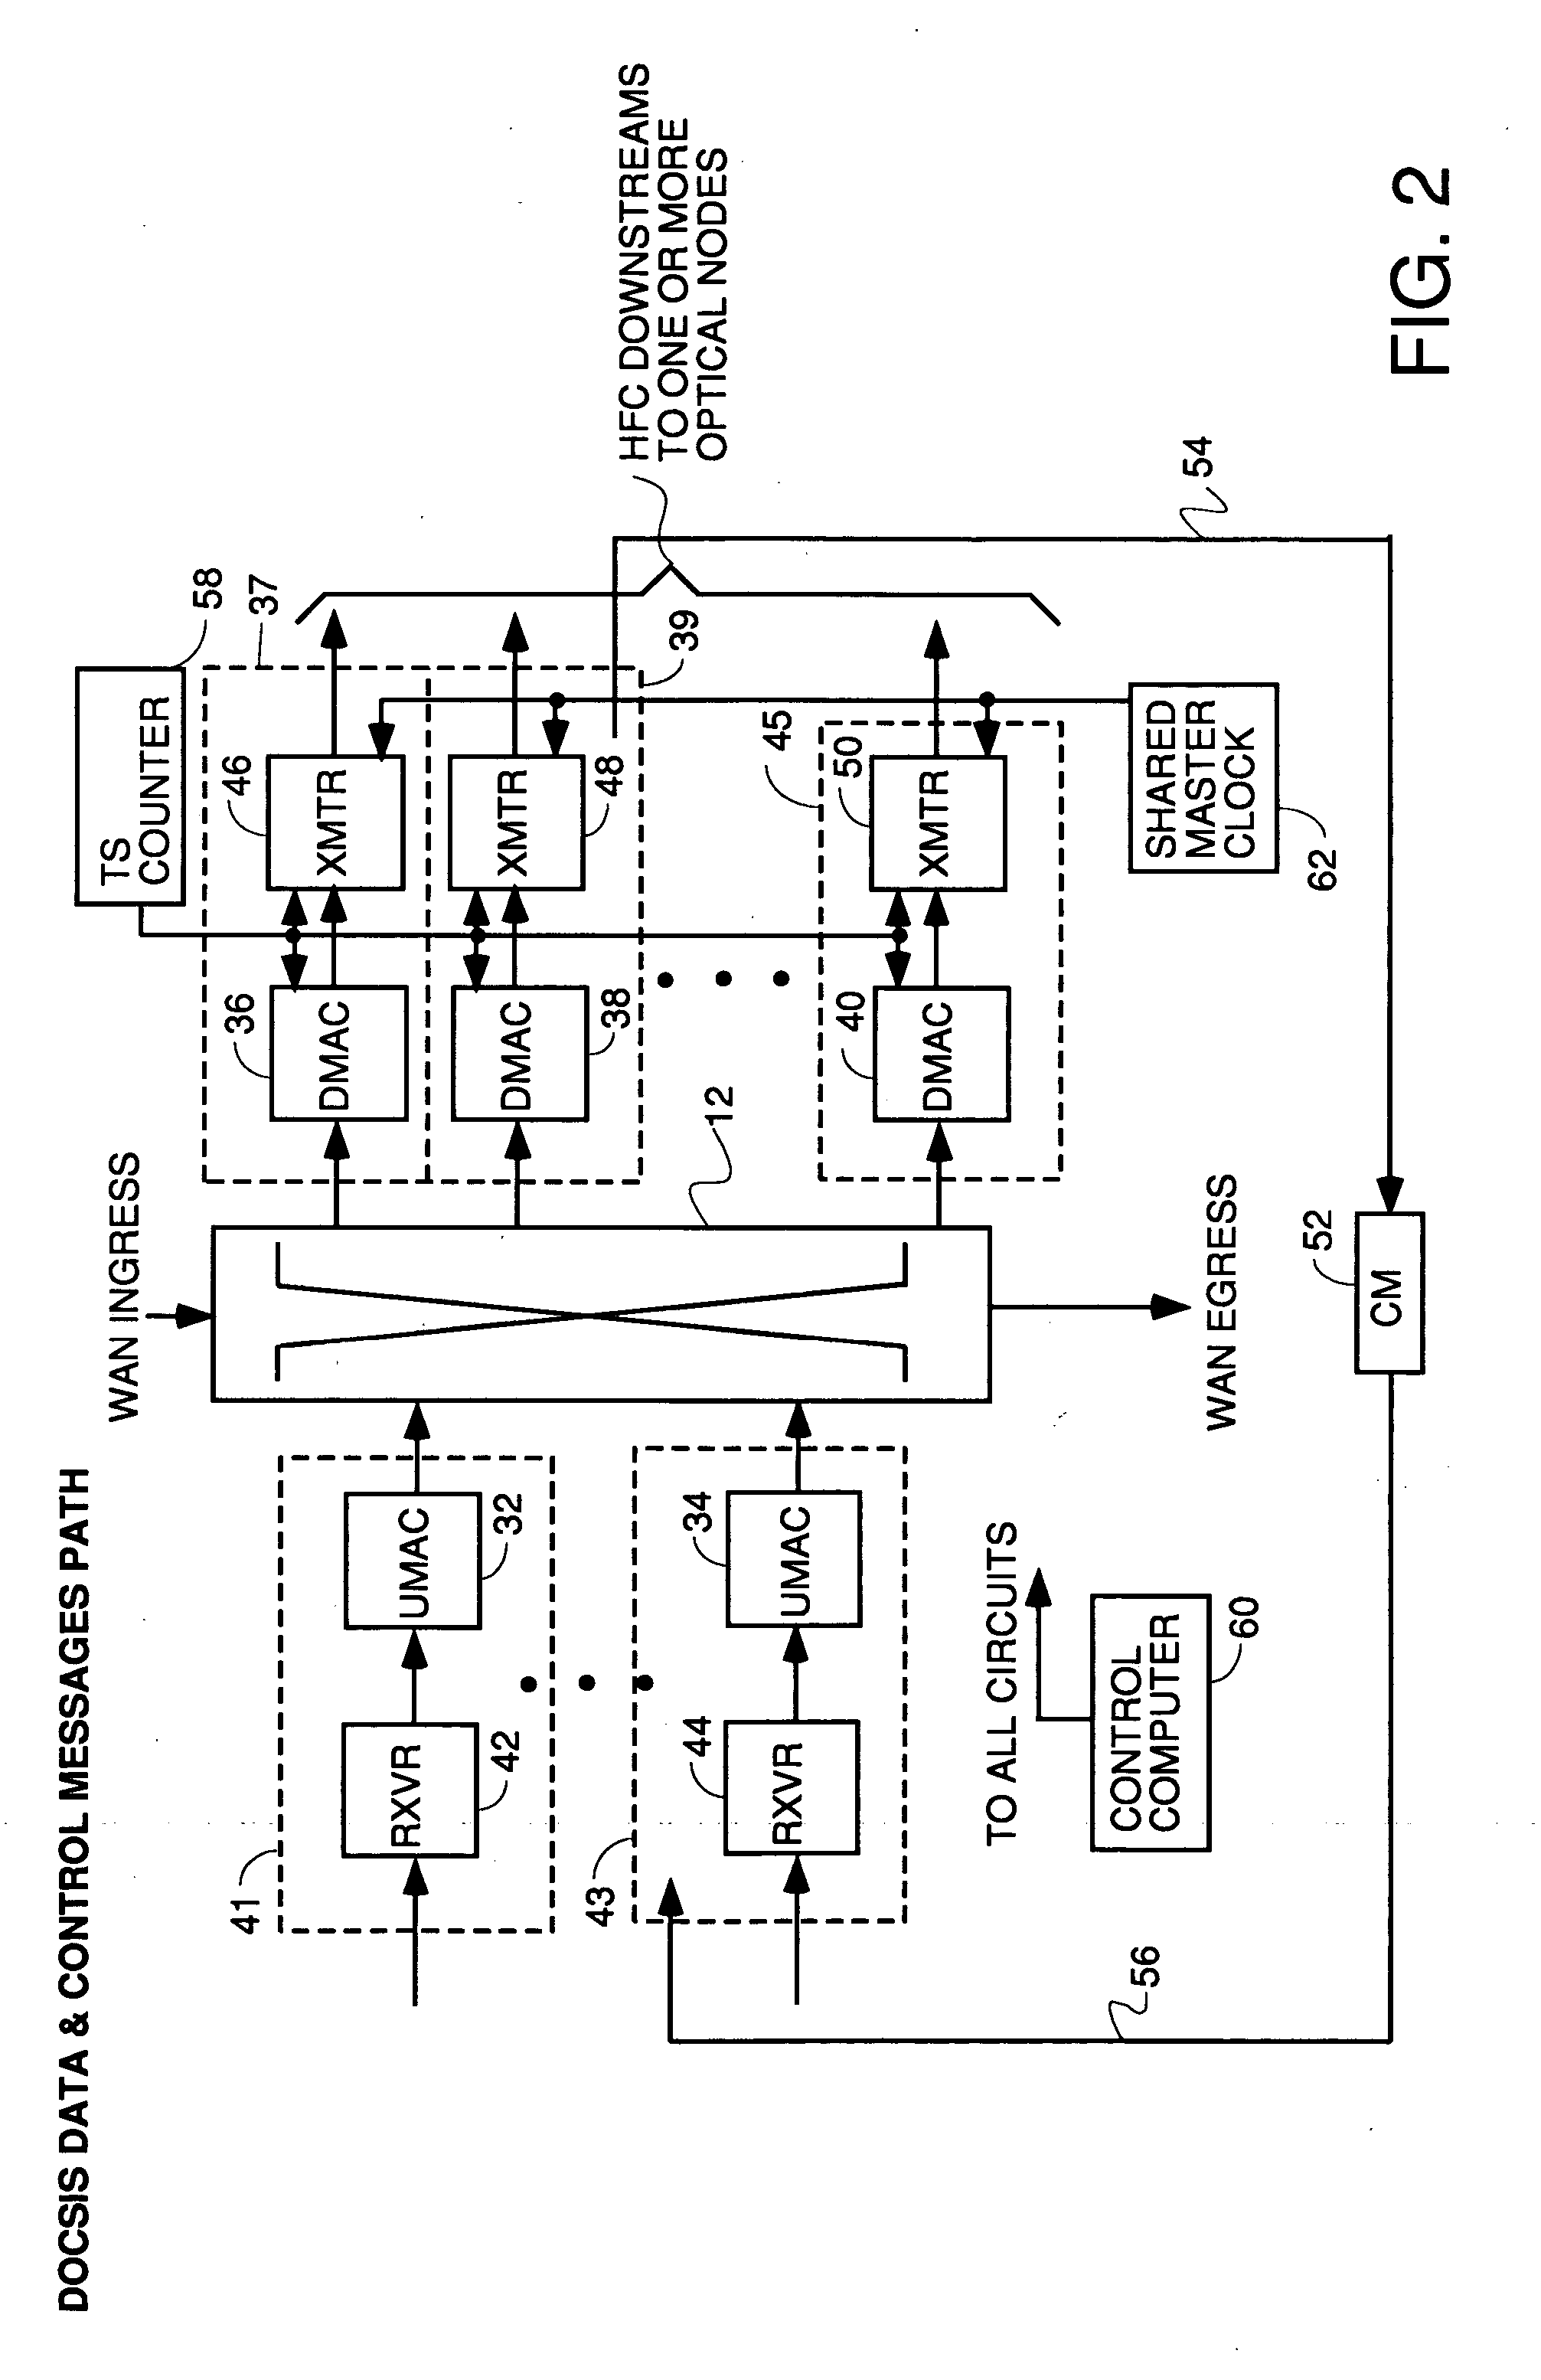 Cable modem termination system with flexible addition of single upstreams or downstreams